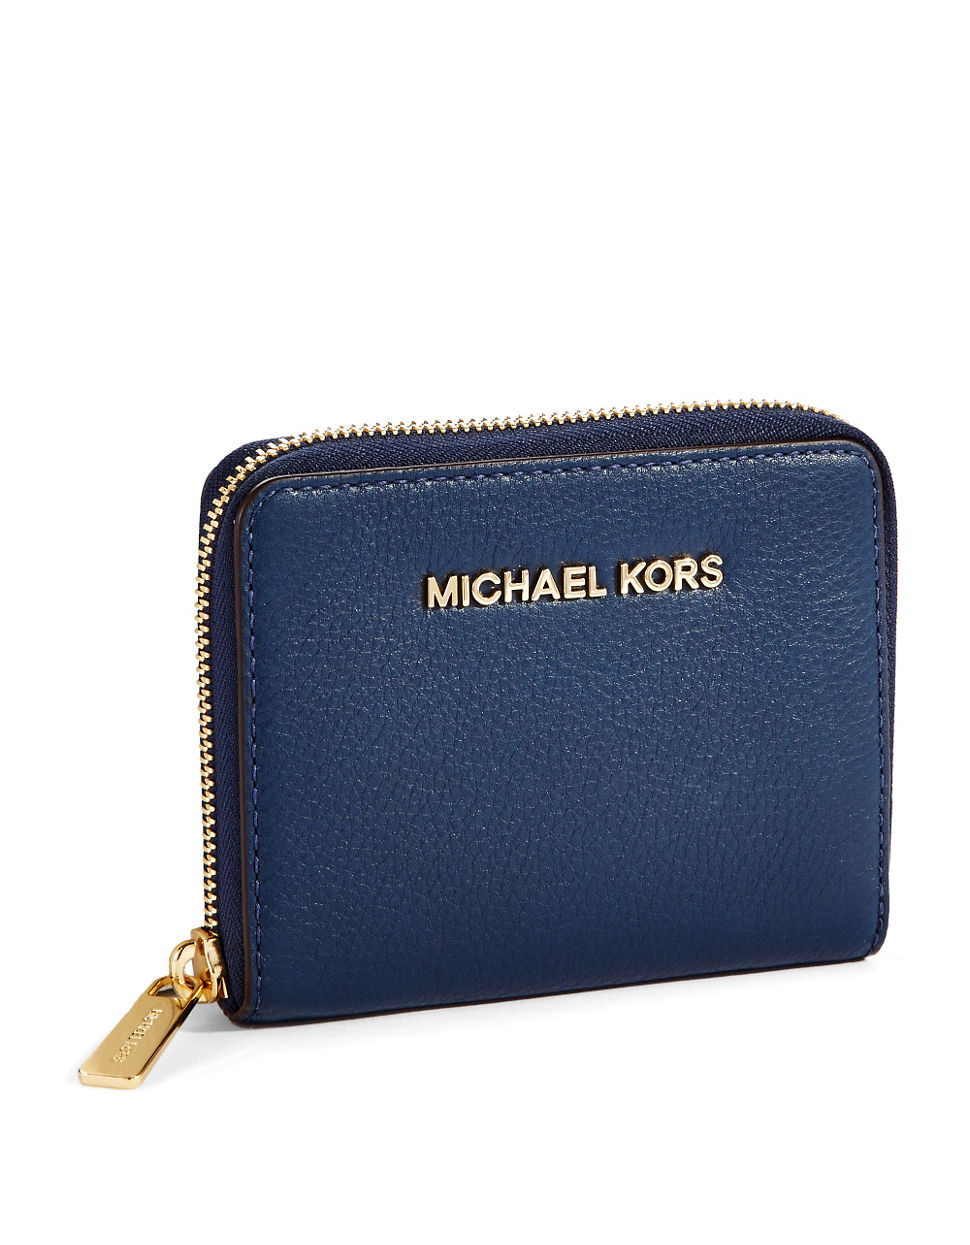 How Much Is The Michael Kors Wallet In The Philippines - Best Design Idea